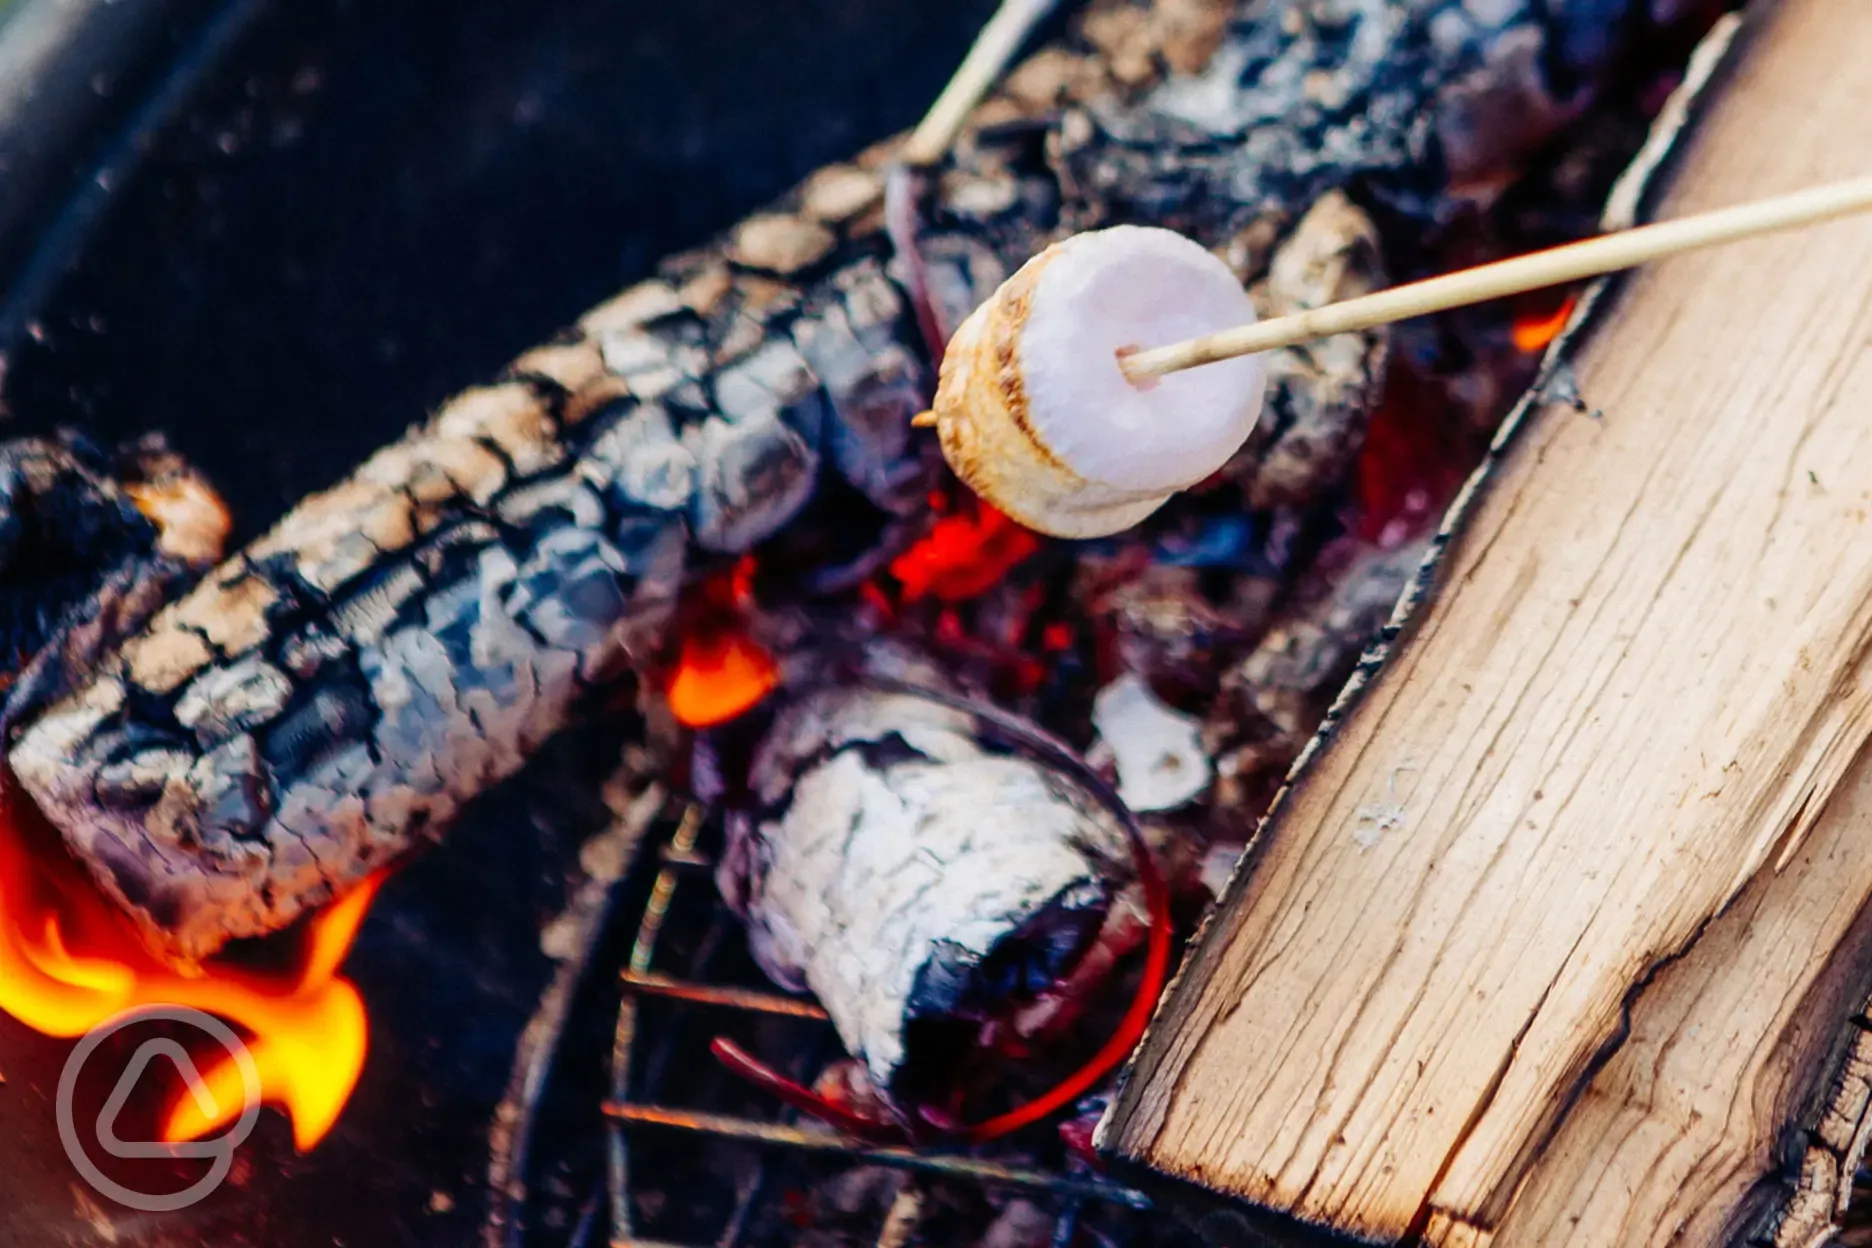 Toasting marshmallows on the fire pit